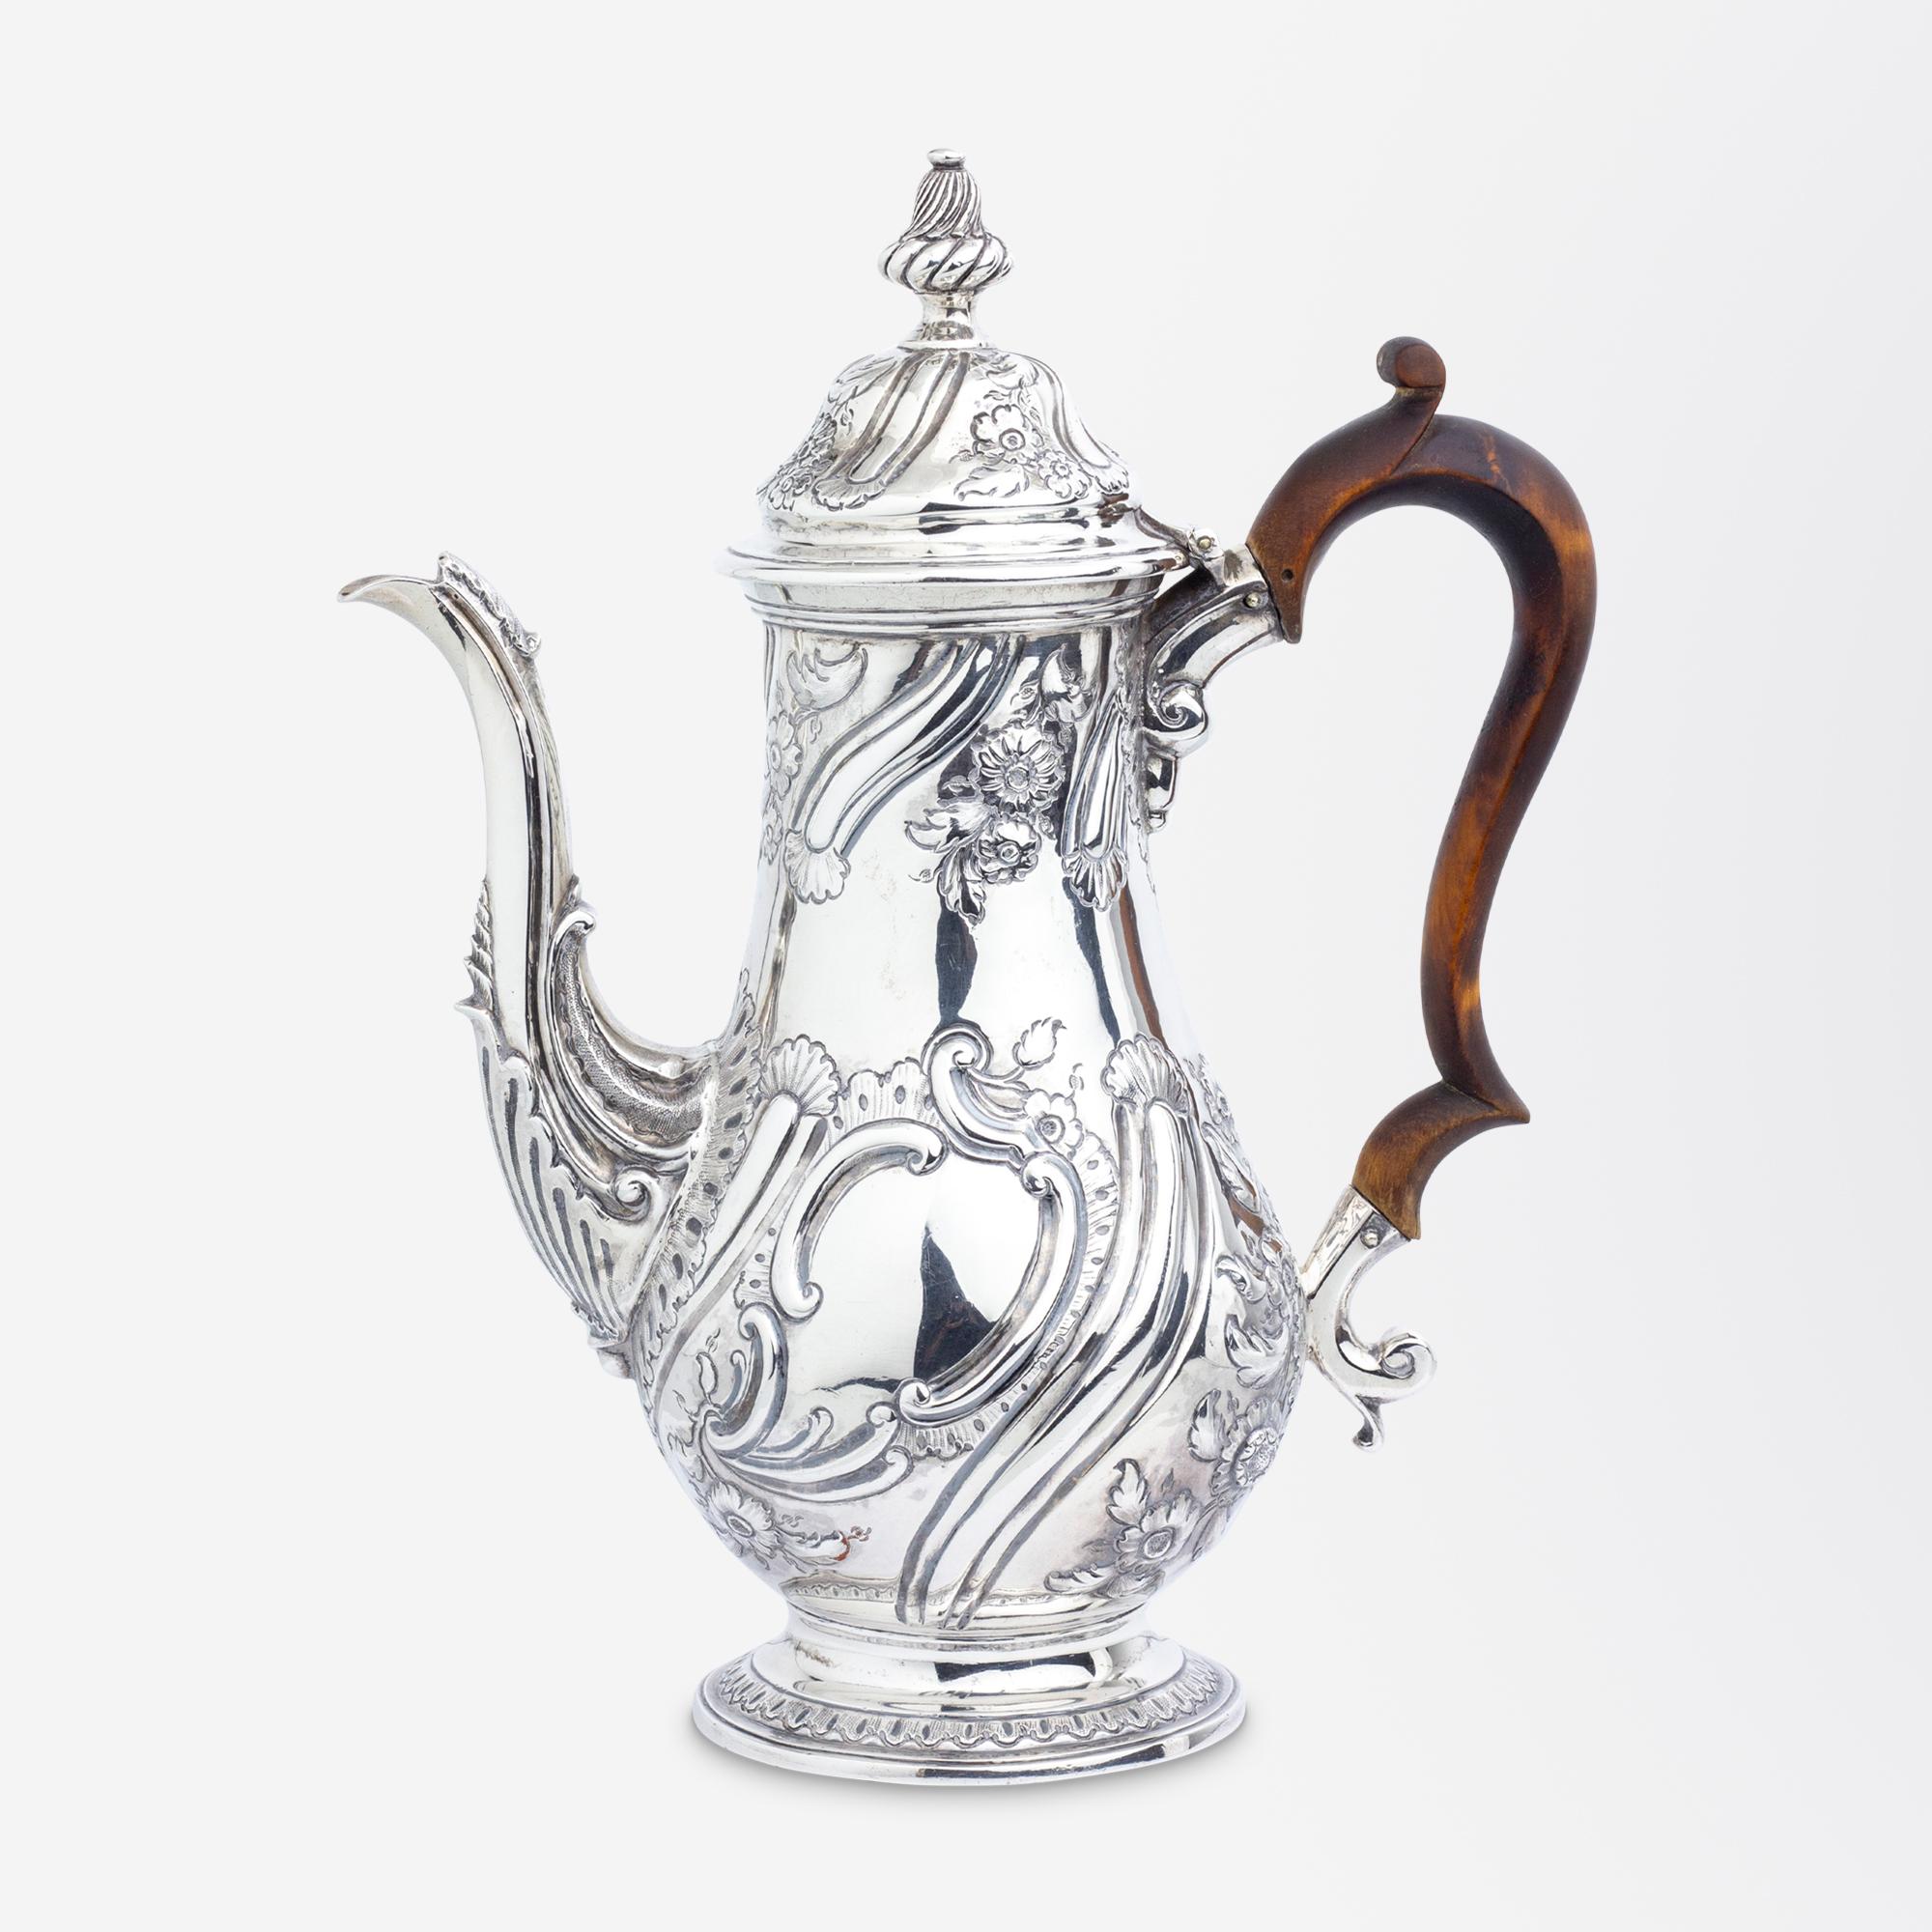 A fine George II sterling silver coffee pot with a wooden handle, floral repousse details and a crest with rubbed maker's mark likely for William Skeen. The coffee pot is very much in the Rococo taste of the early to mid 18th Century with